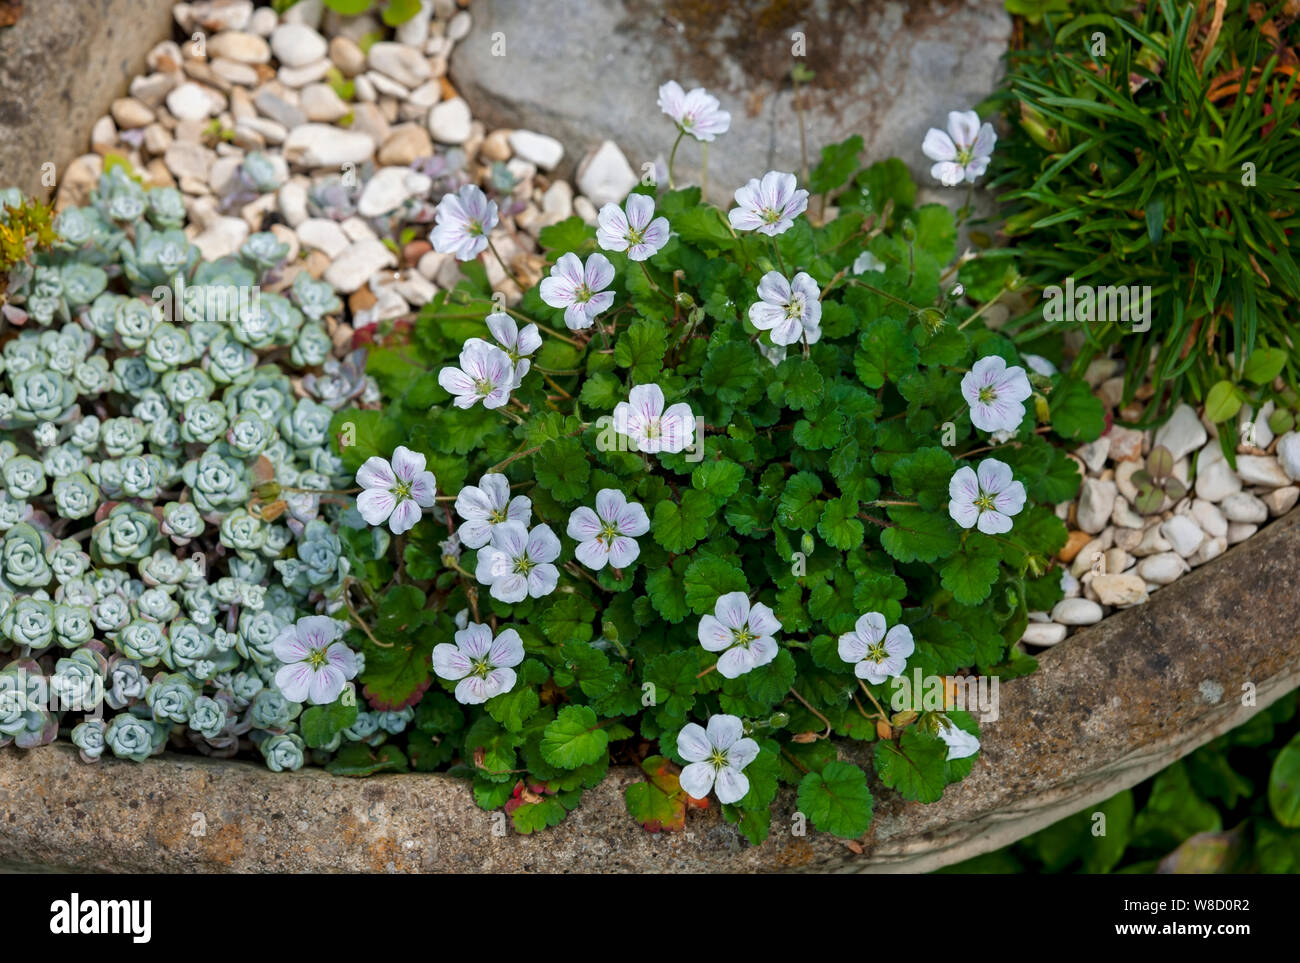 Close up of White Stork's Bill Erodium flower flowers growing in a rockery plant garden England UK United Kingdom GB Great Britain Stock Photo